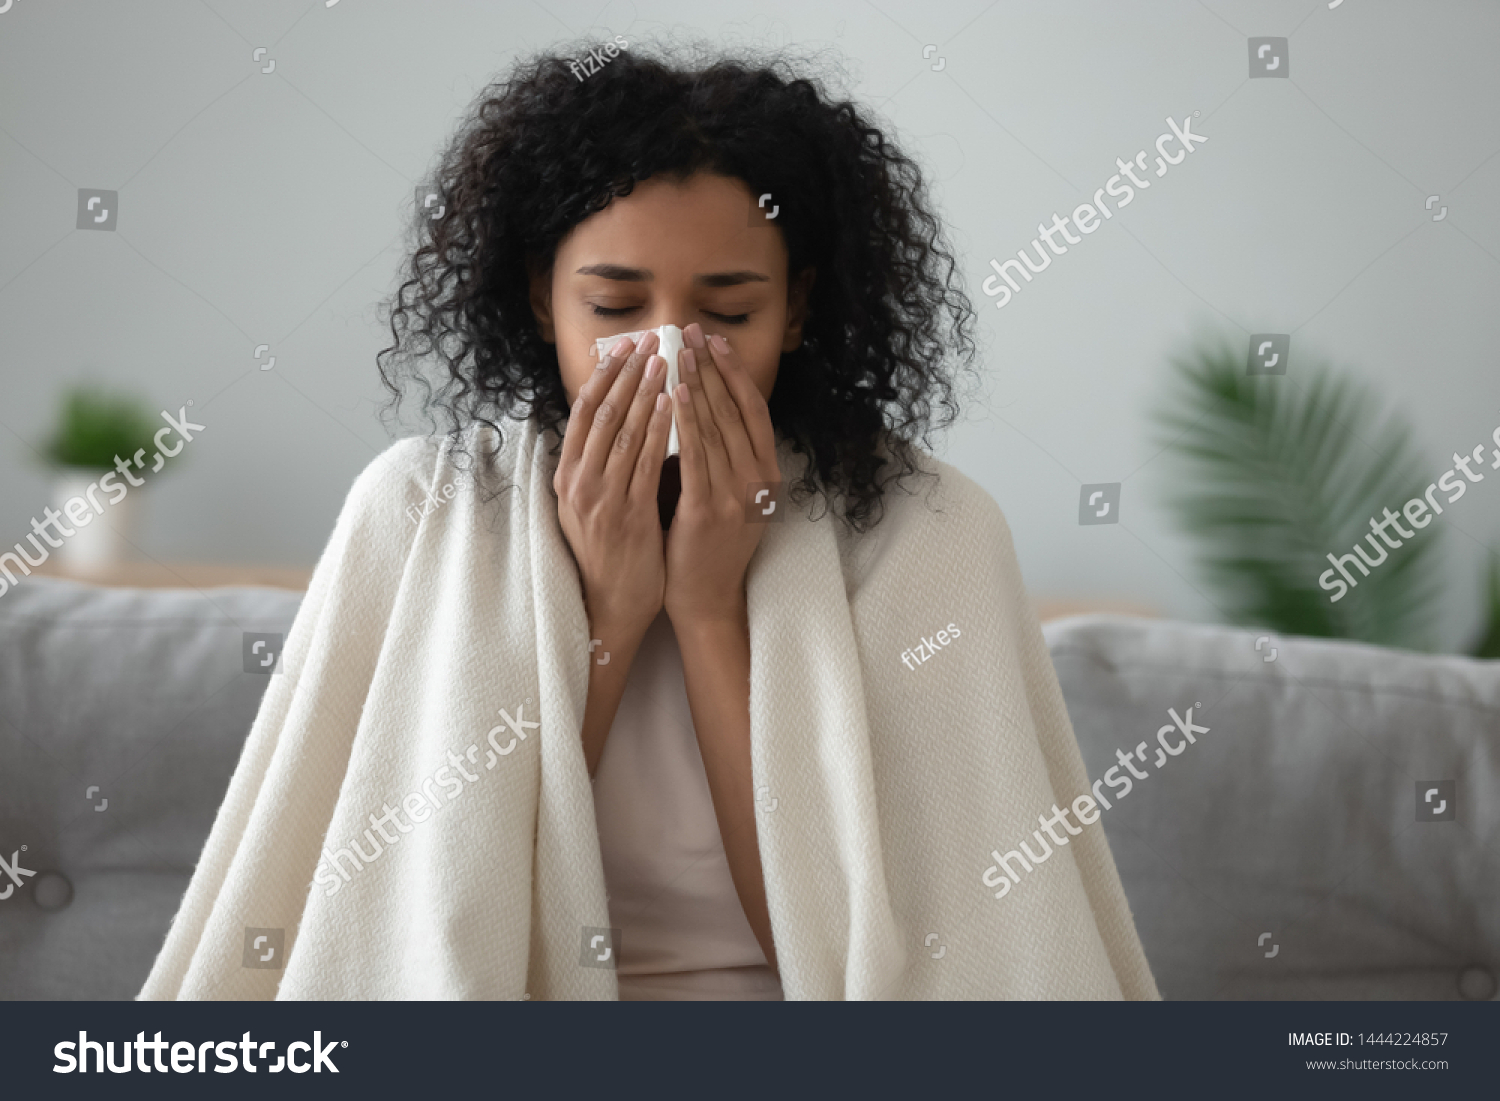 Ill african young woman covered with blanket blowing running nose got fever caught cold sneezing in tissue sit on sofa, sick allergic black girl having allergy symptoms coughing at home, flu concept #1444224857